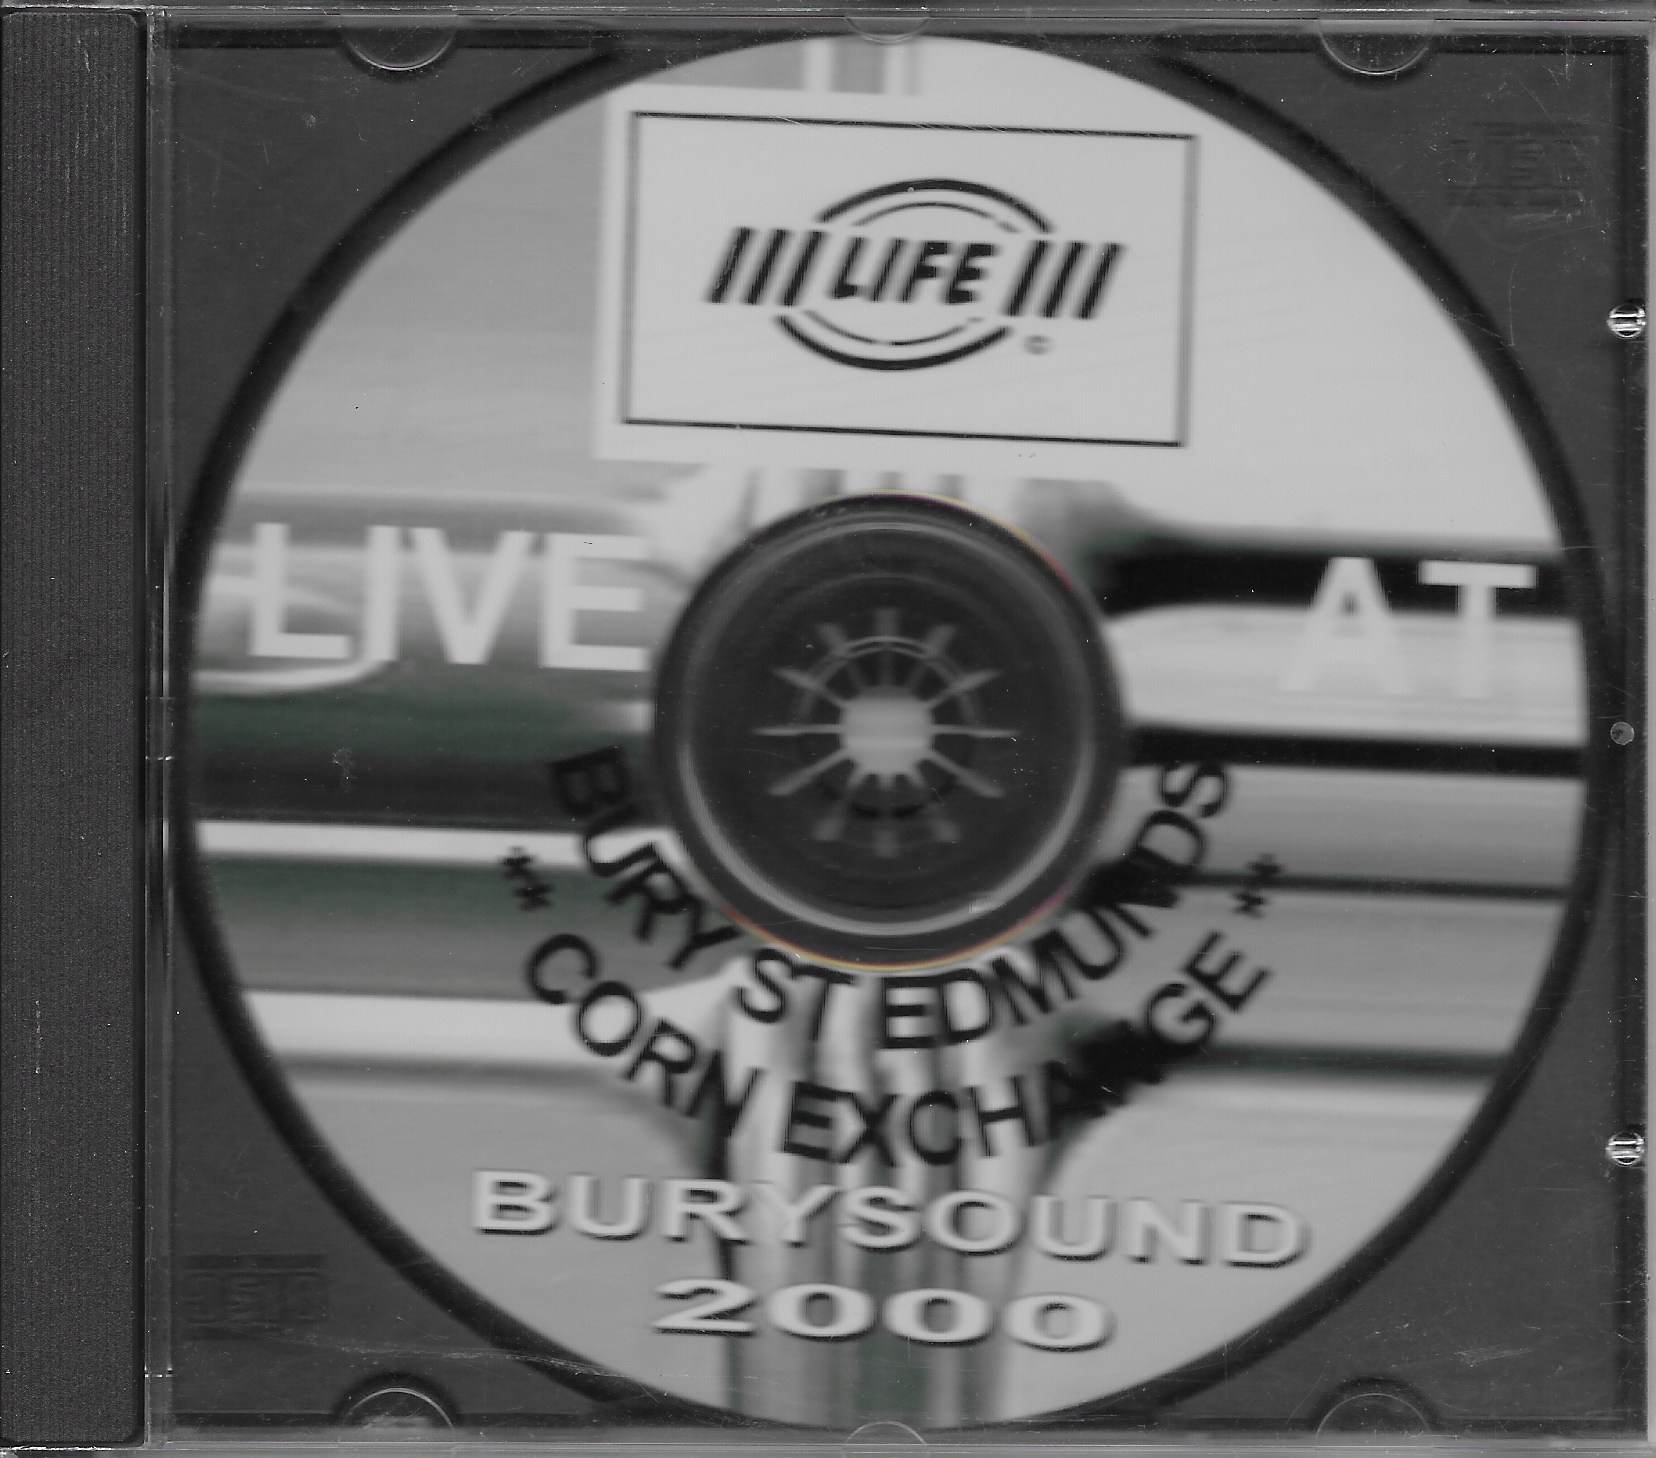 Picture of Live at Bury Sound 2000 by artist Life 